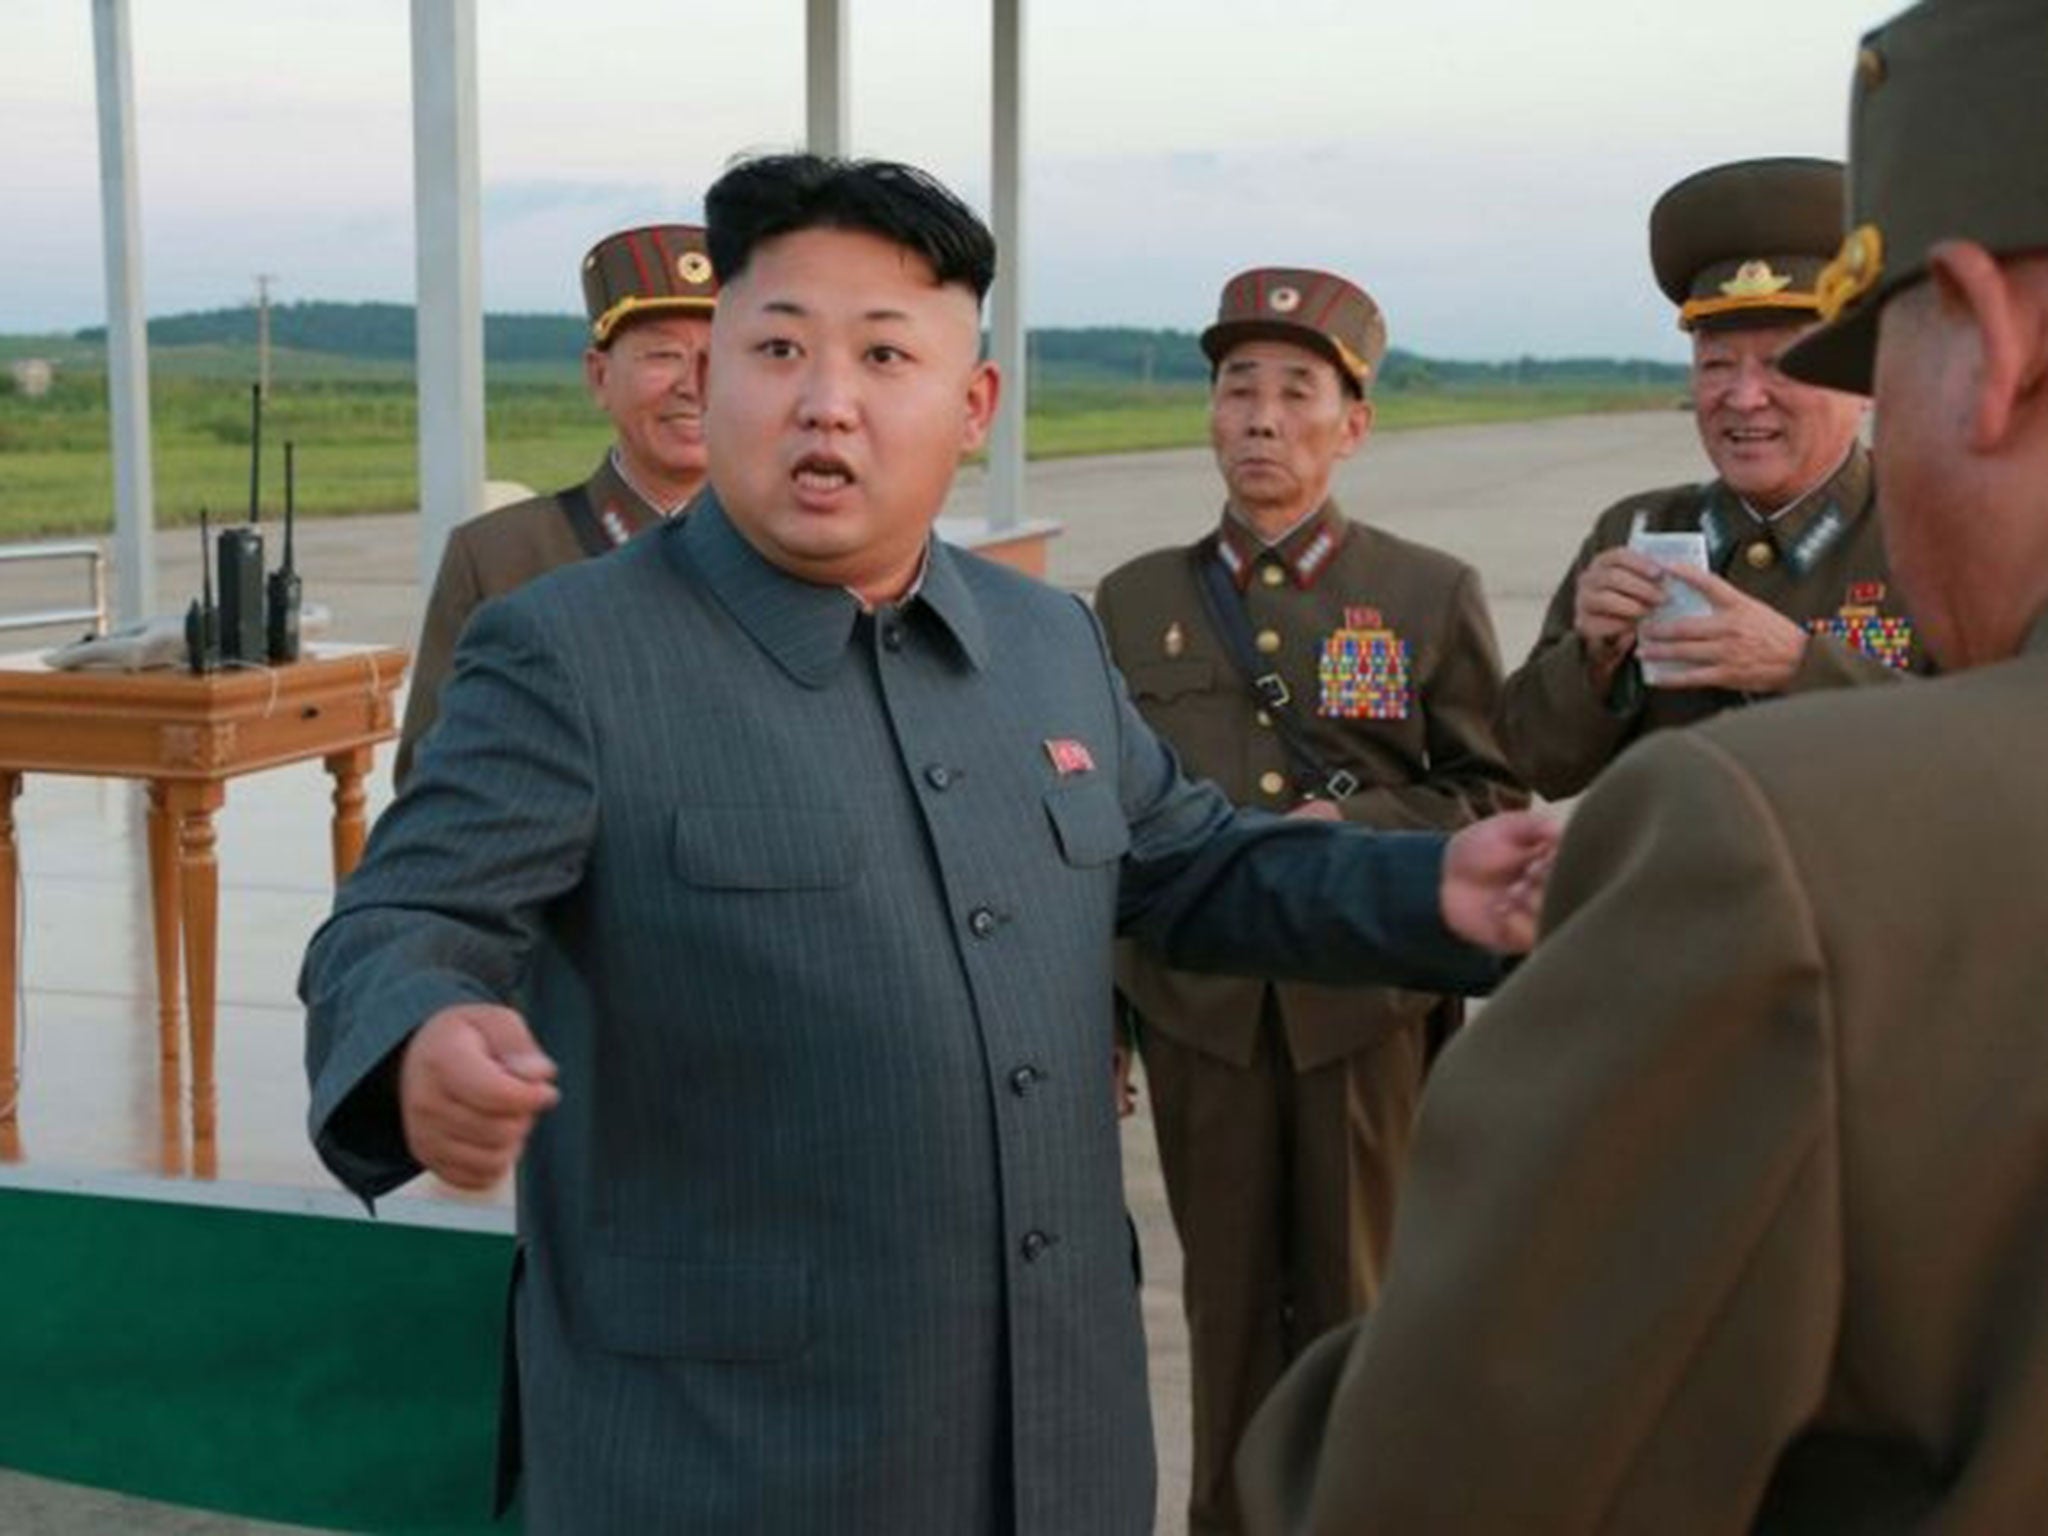 North Korea is furious at new US sanctions imposed in wake of Sony hack